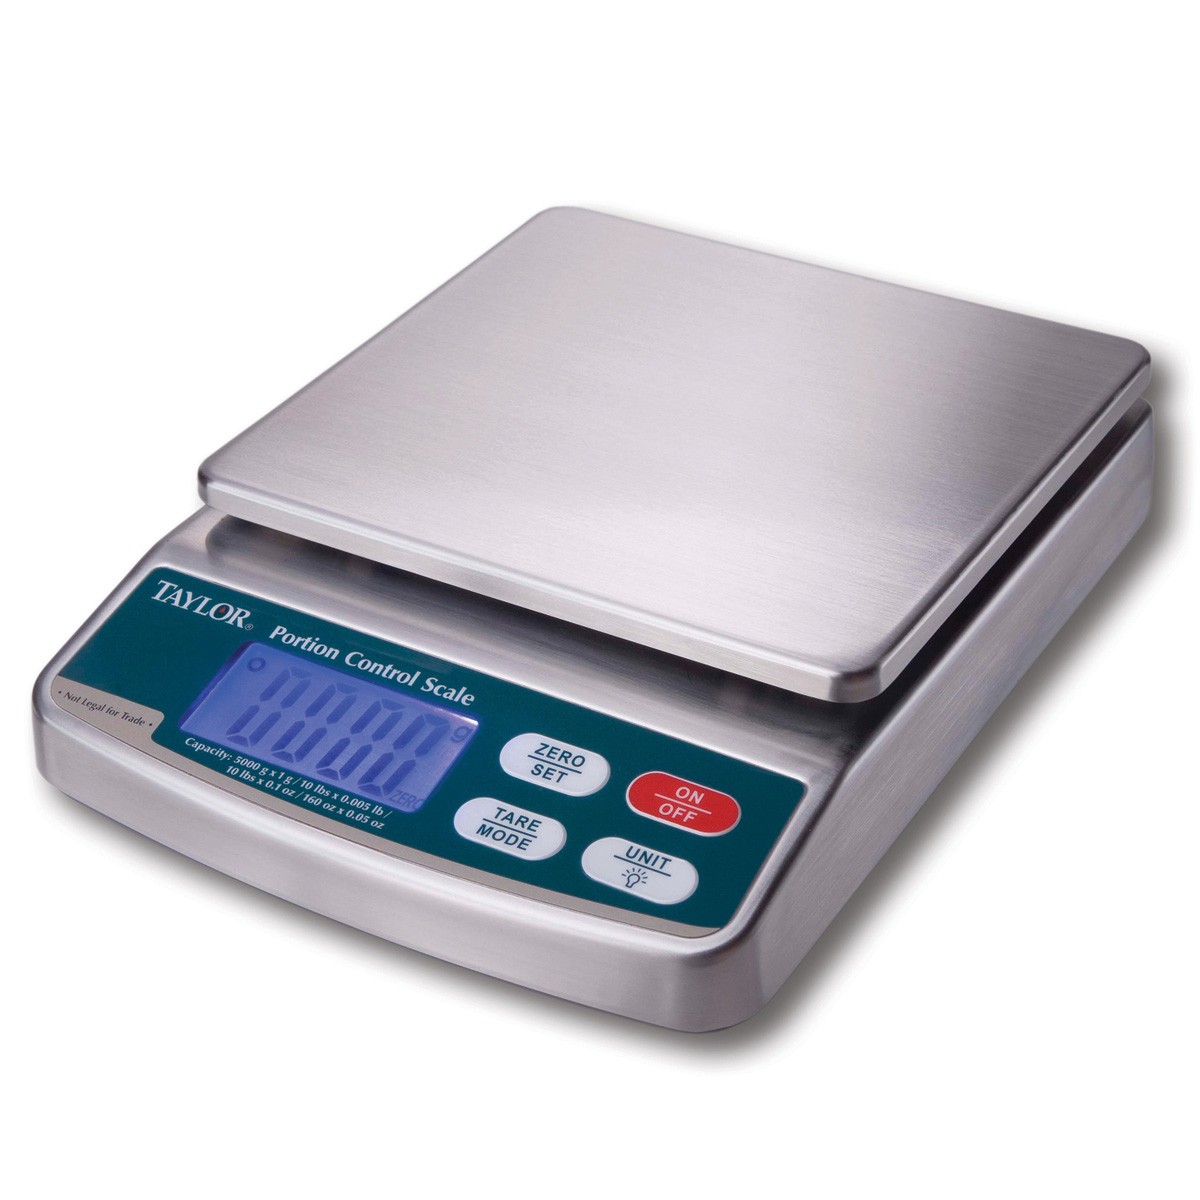 Portable Digital Weighing Scales - Set Of 4